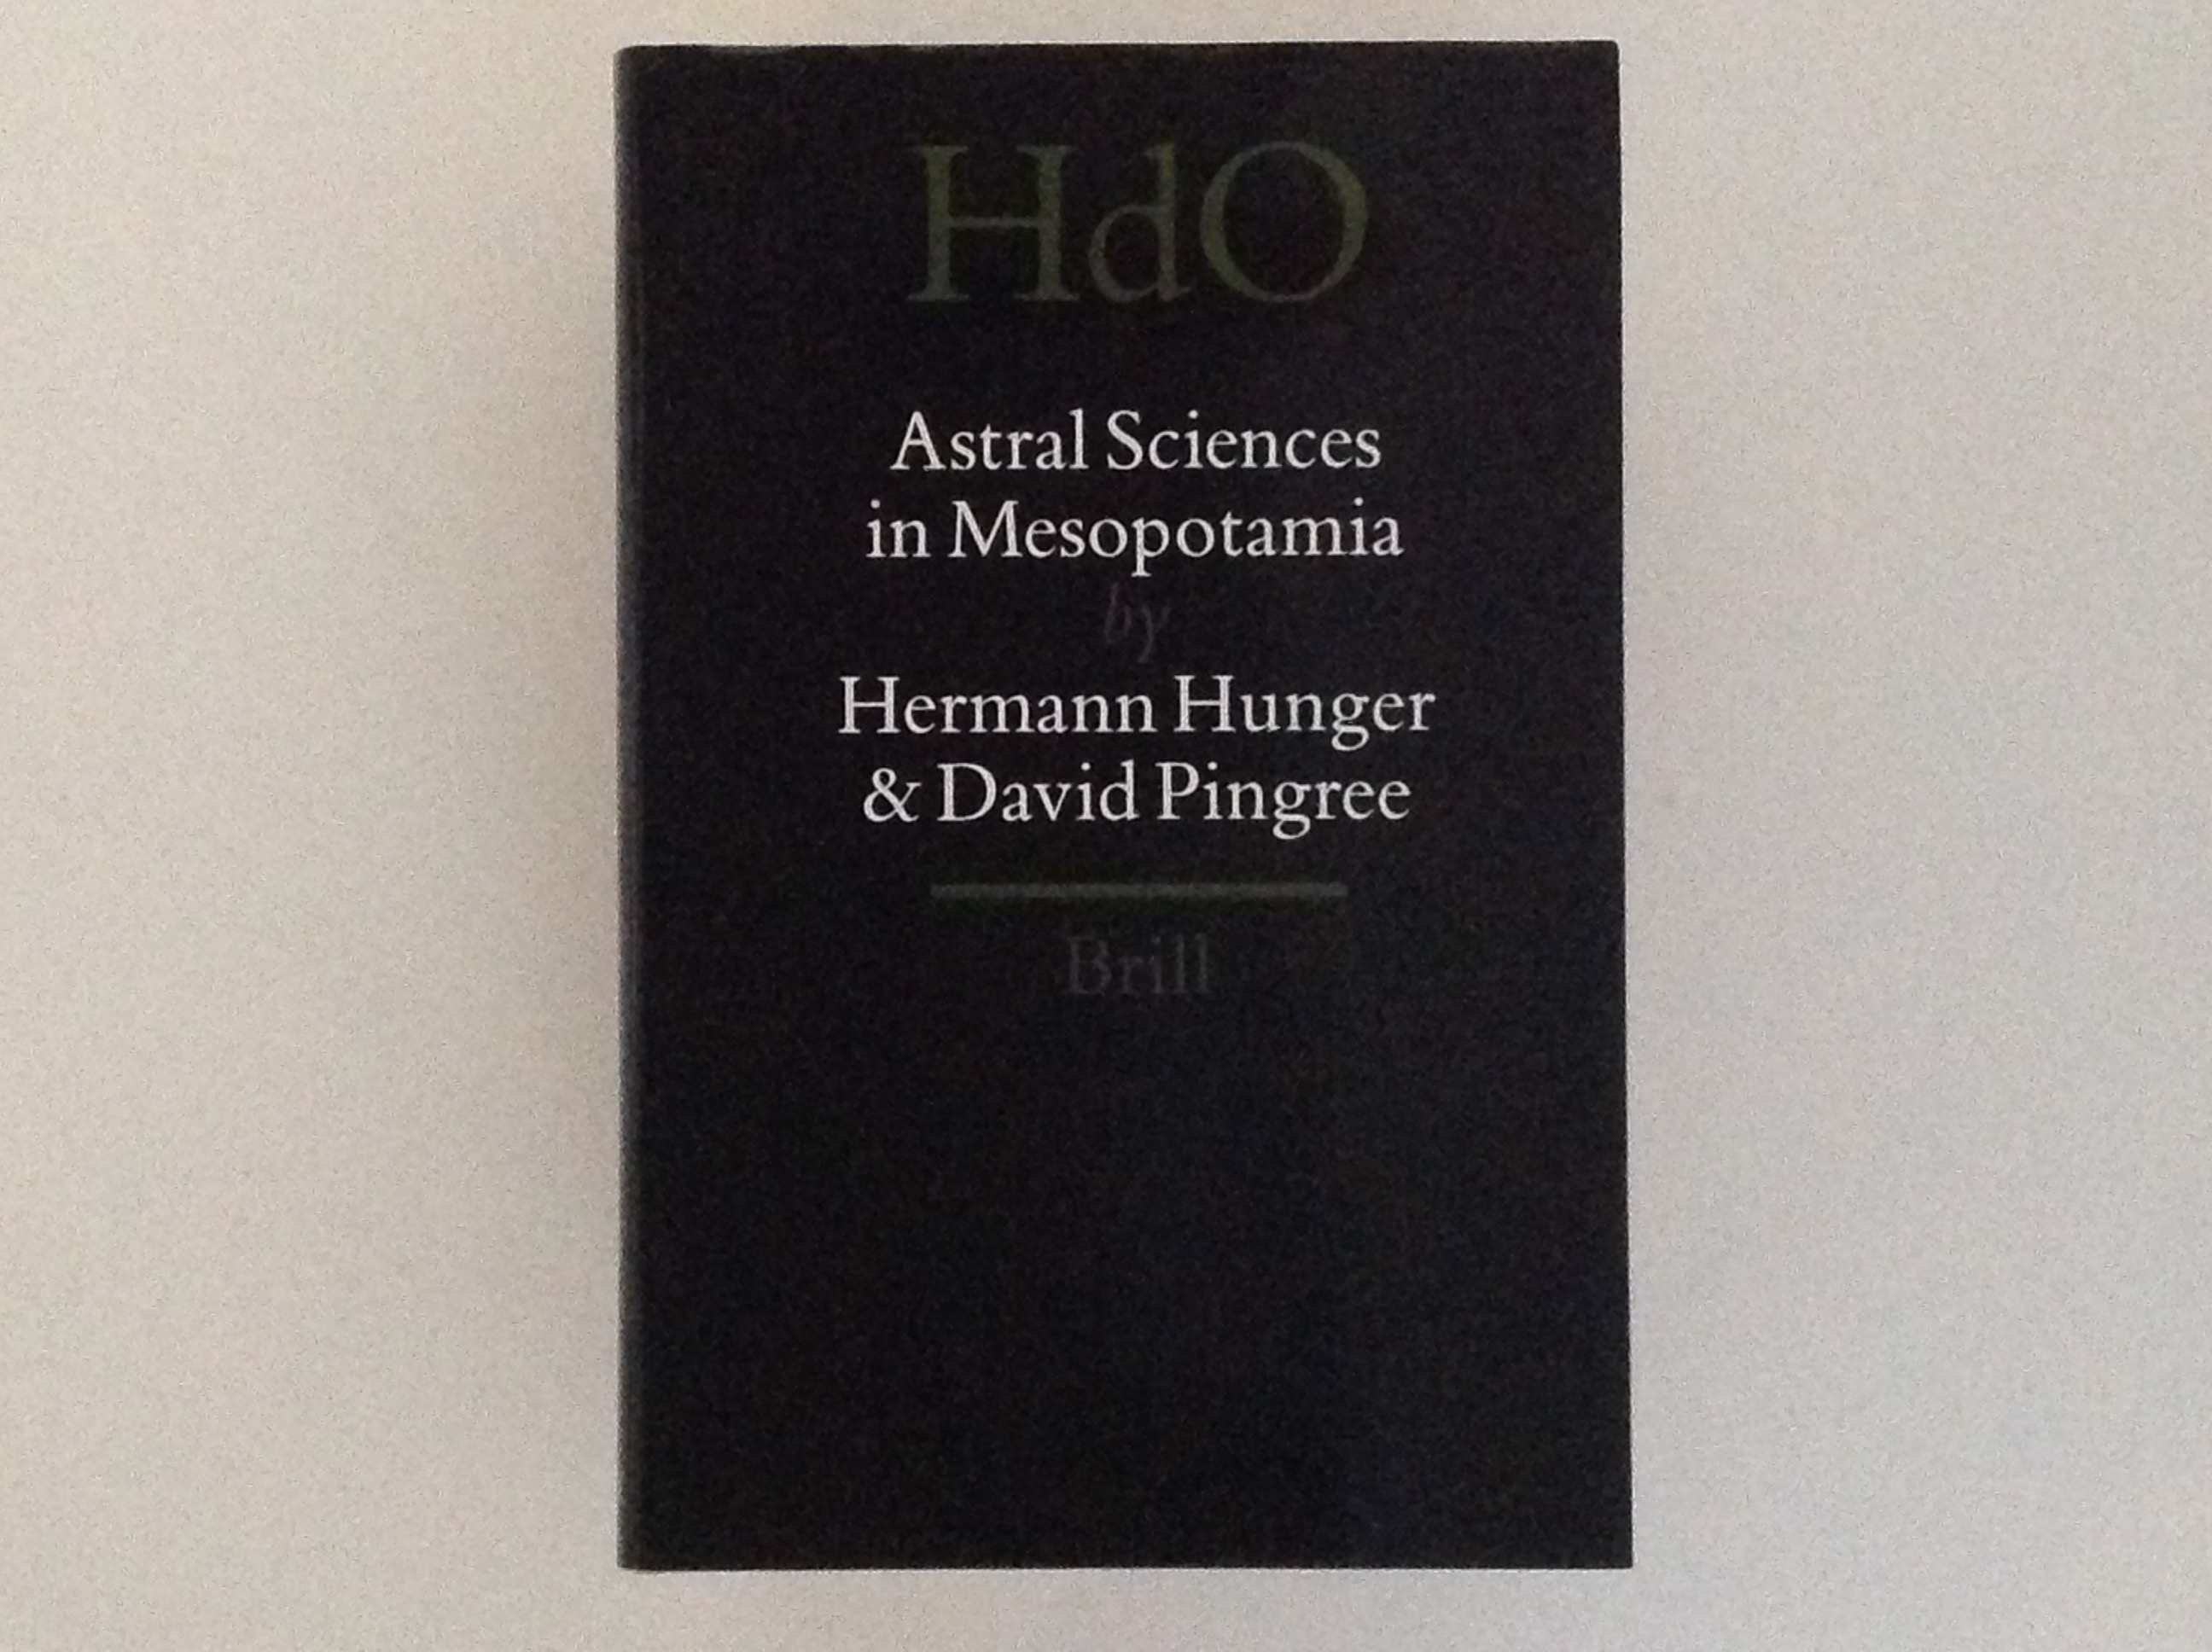 Astral Sciences in Mesopotamia - HdO the Near and Middle East - HERMANN HUNGER & DAVID PINGREE